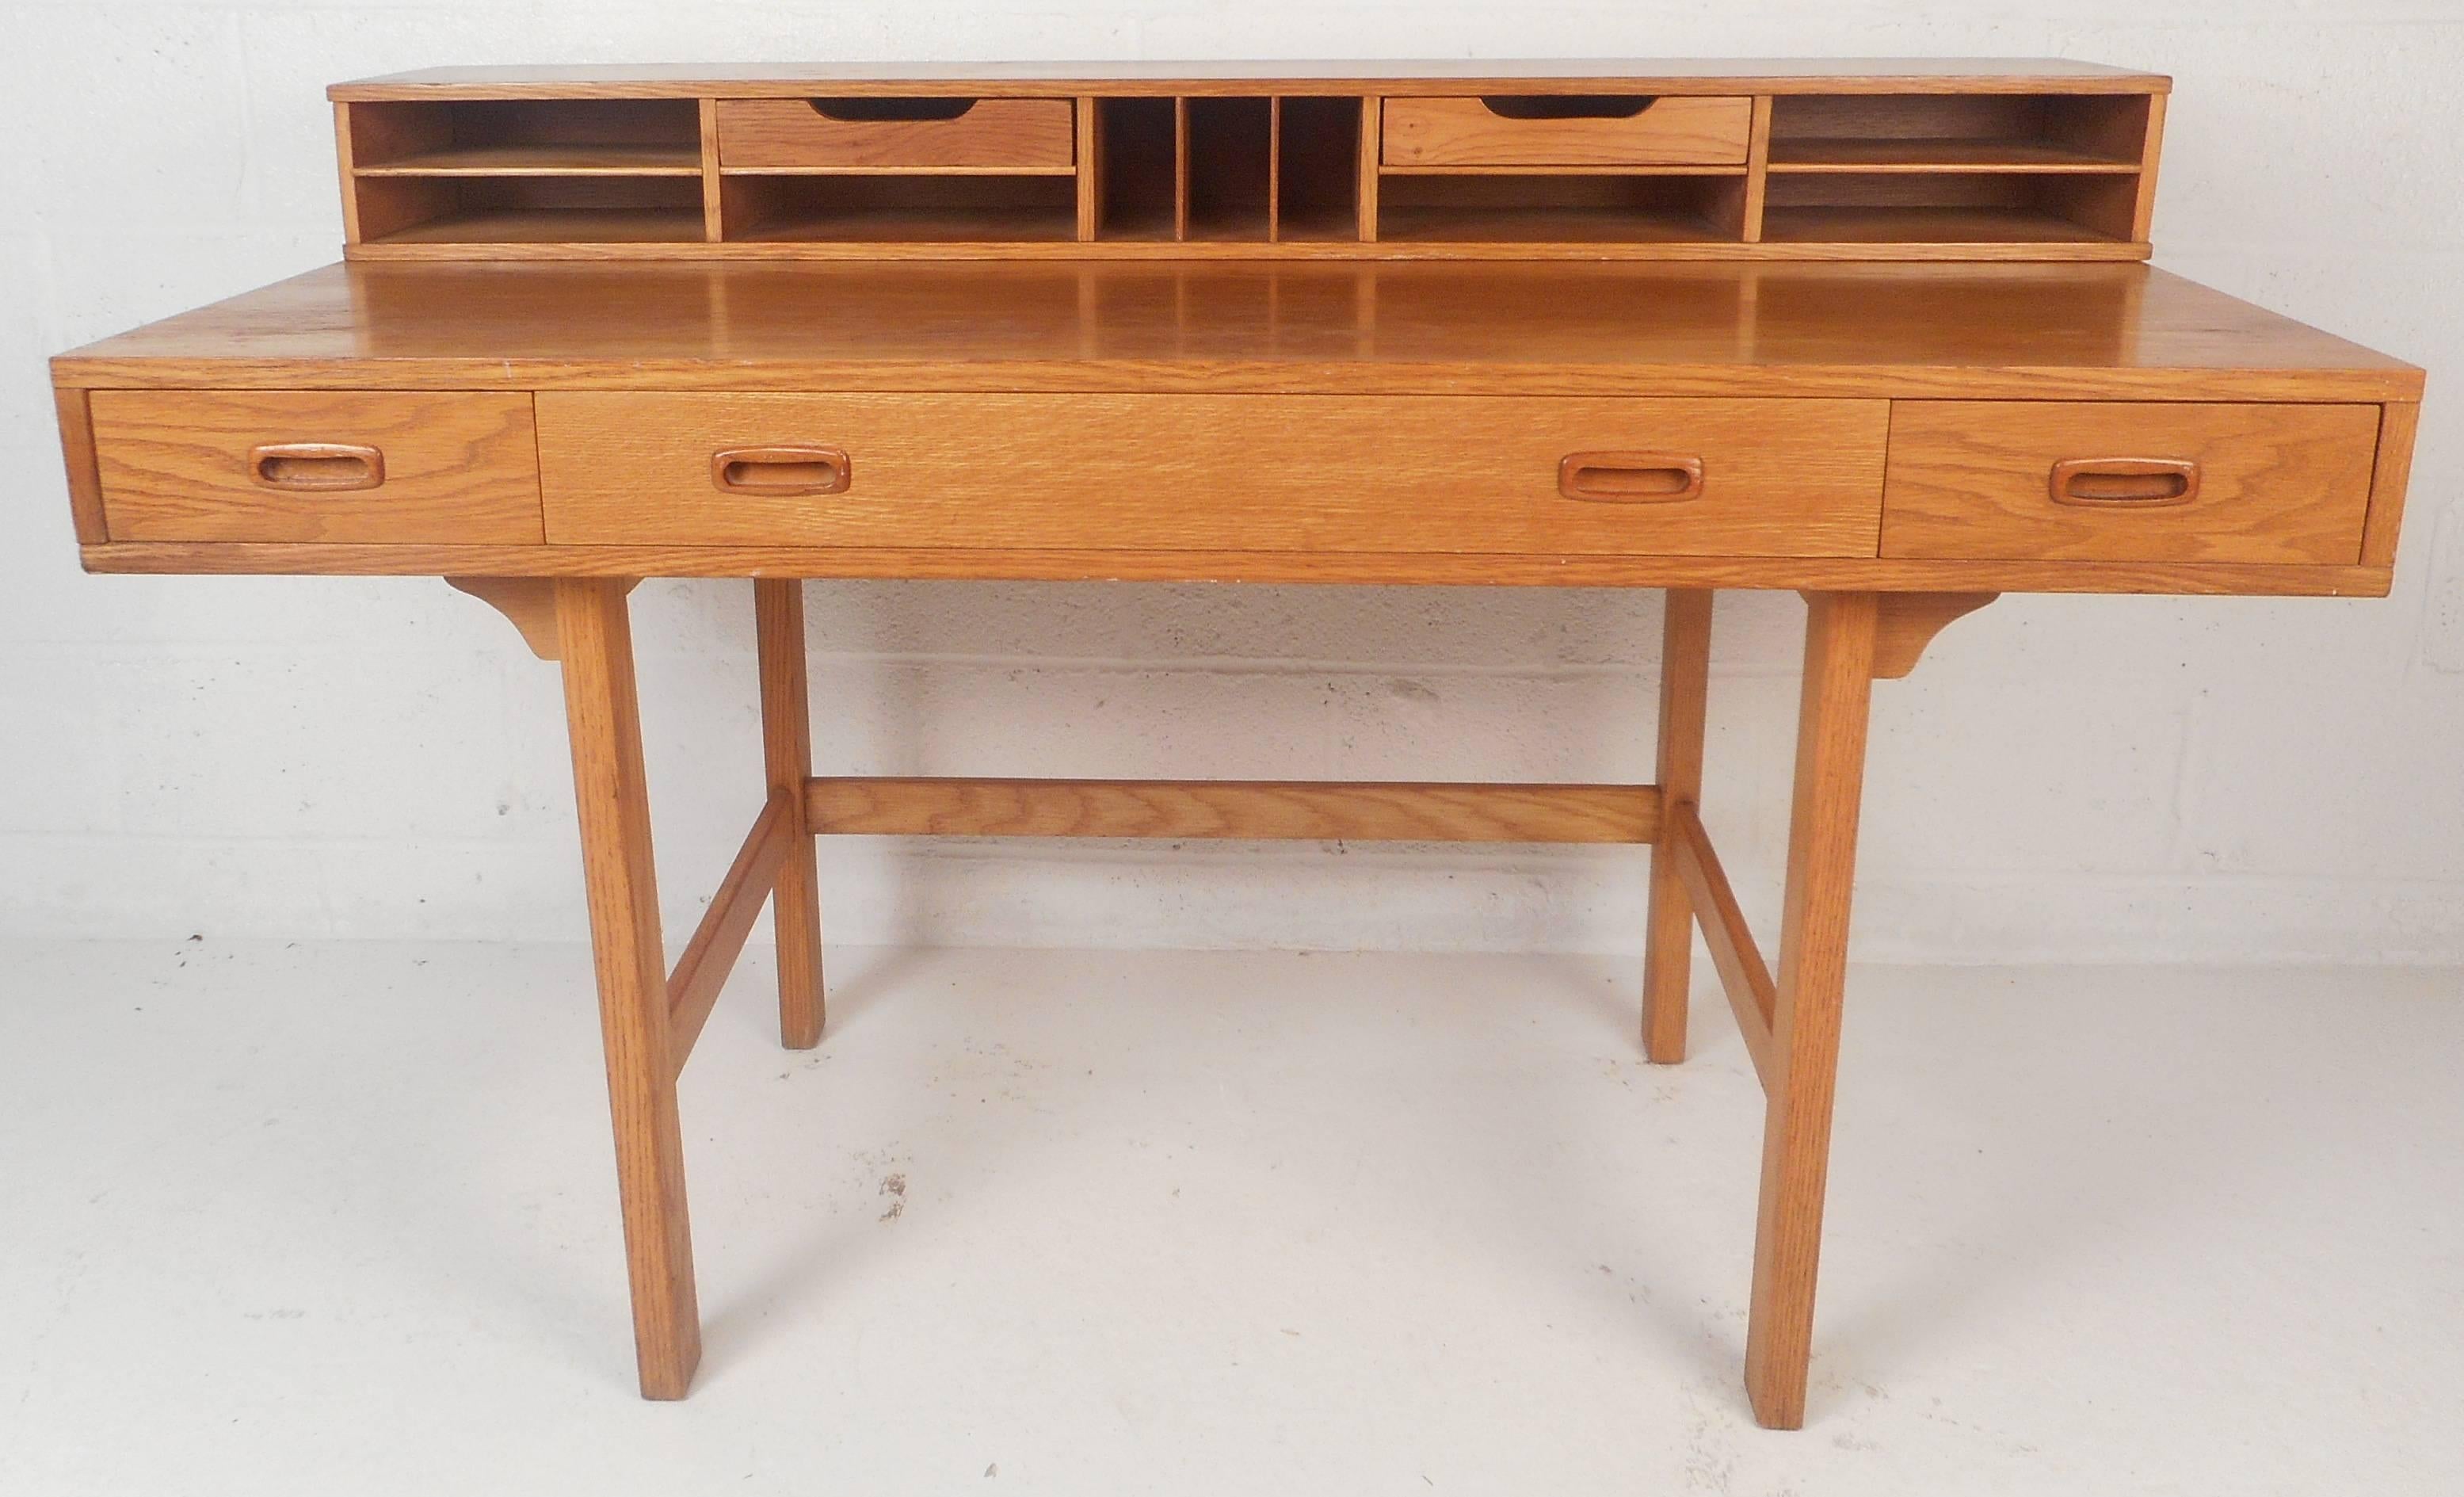 Stunning vintage modern desk features a unique top that flips down and adds 9